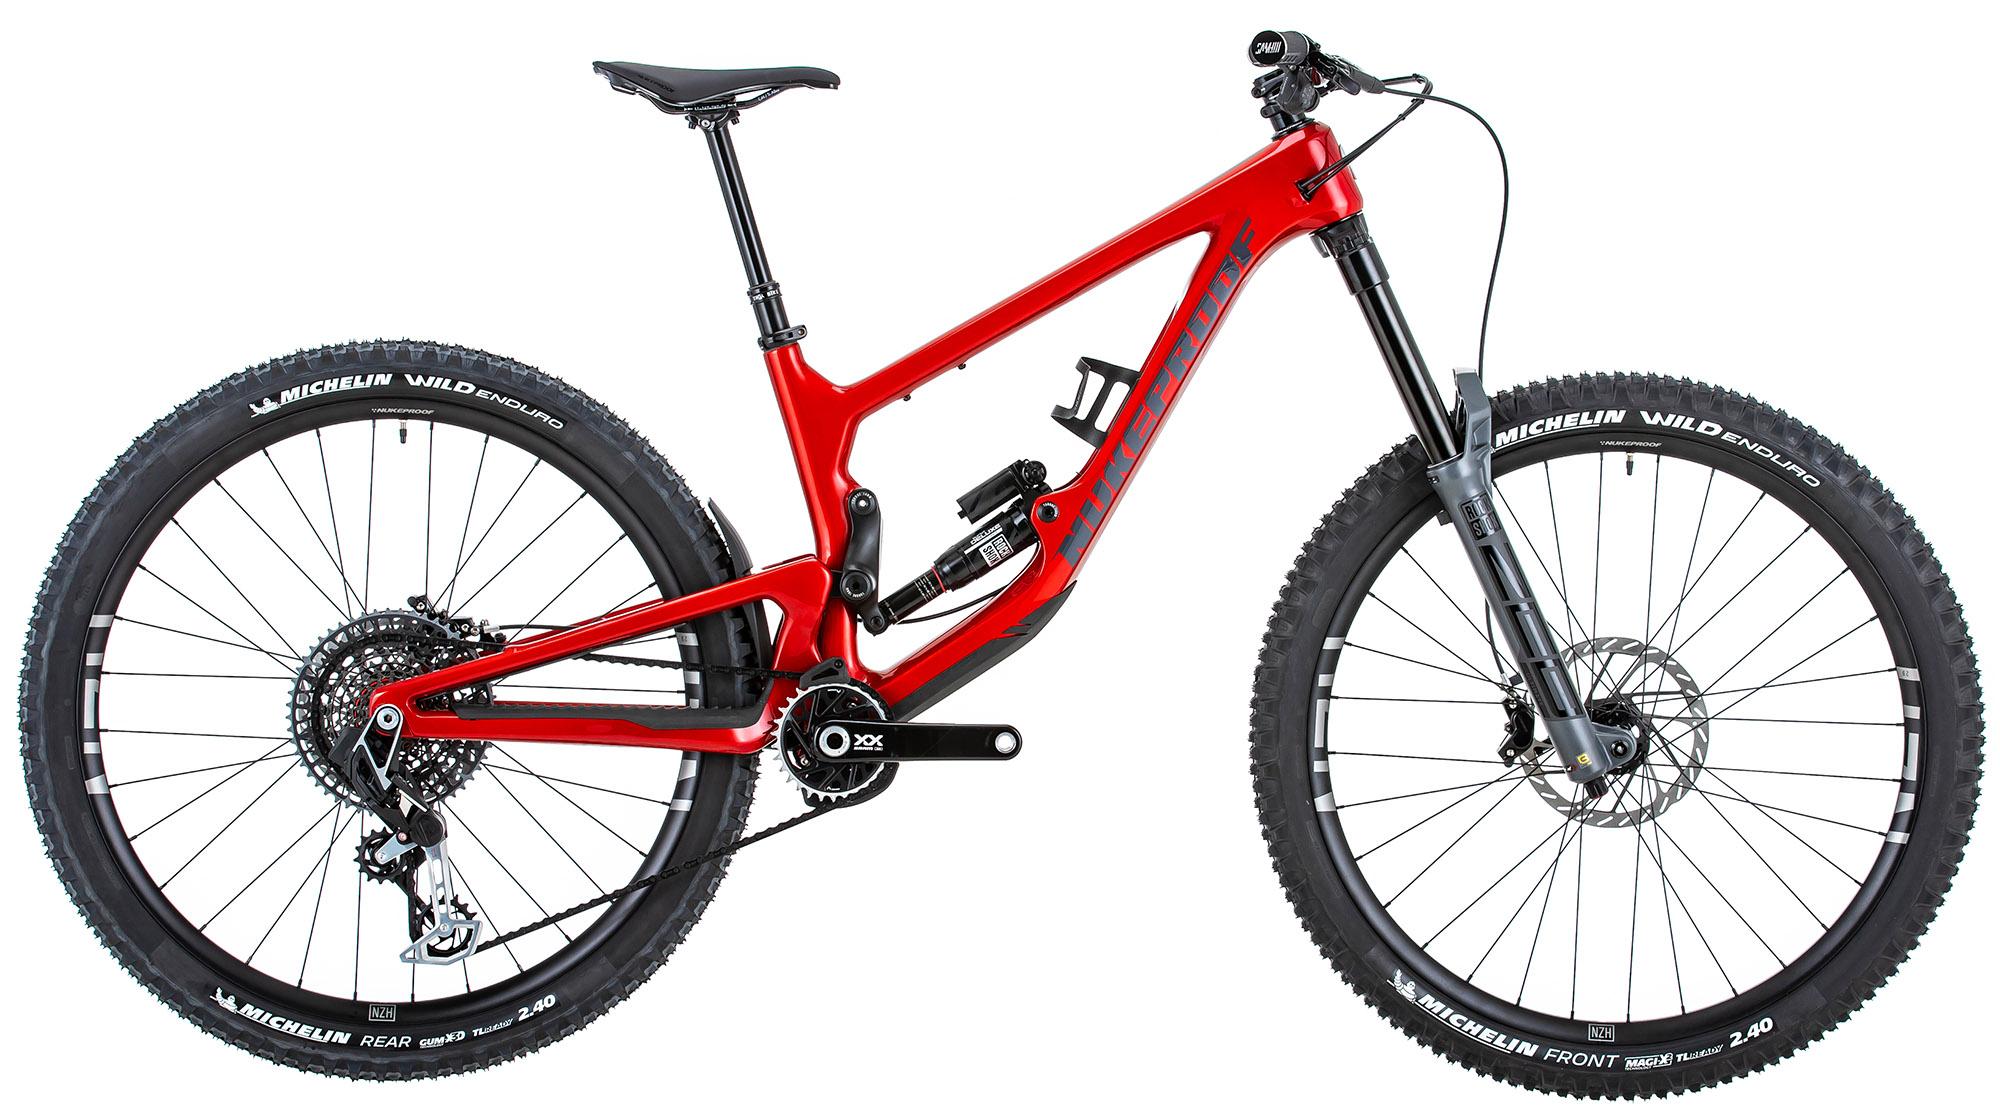 Nukeproof Giga 290 Rs Carbon Mountain Bike (xx Eagle Trans) - Racing Red